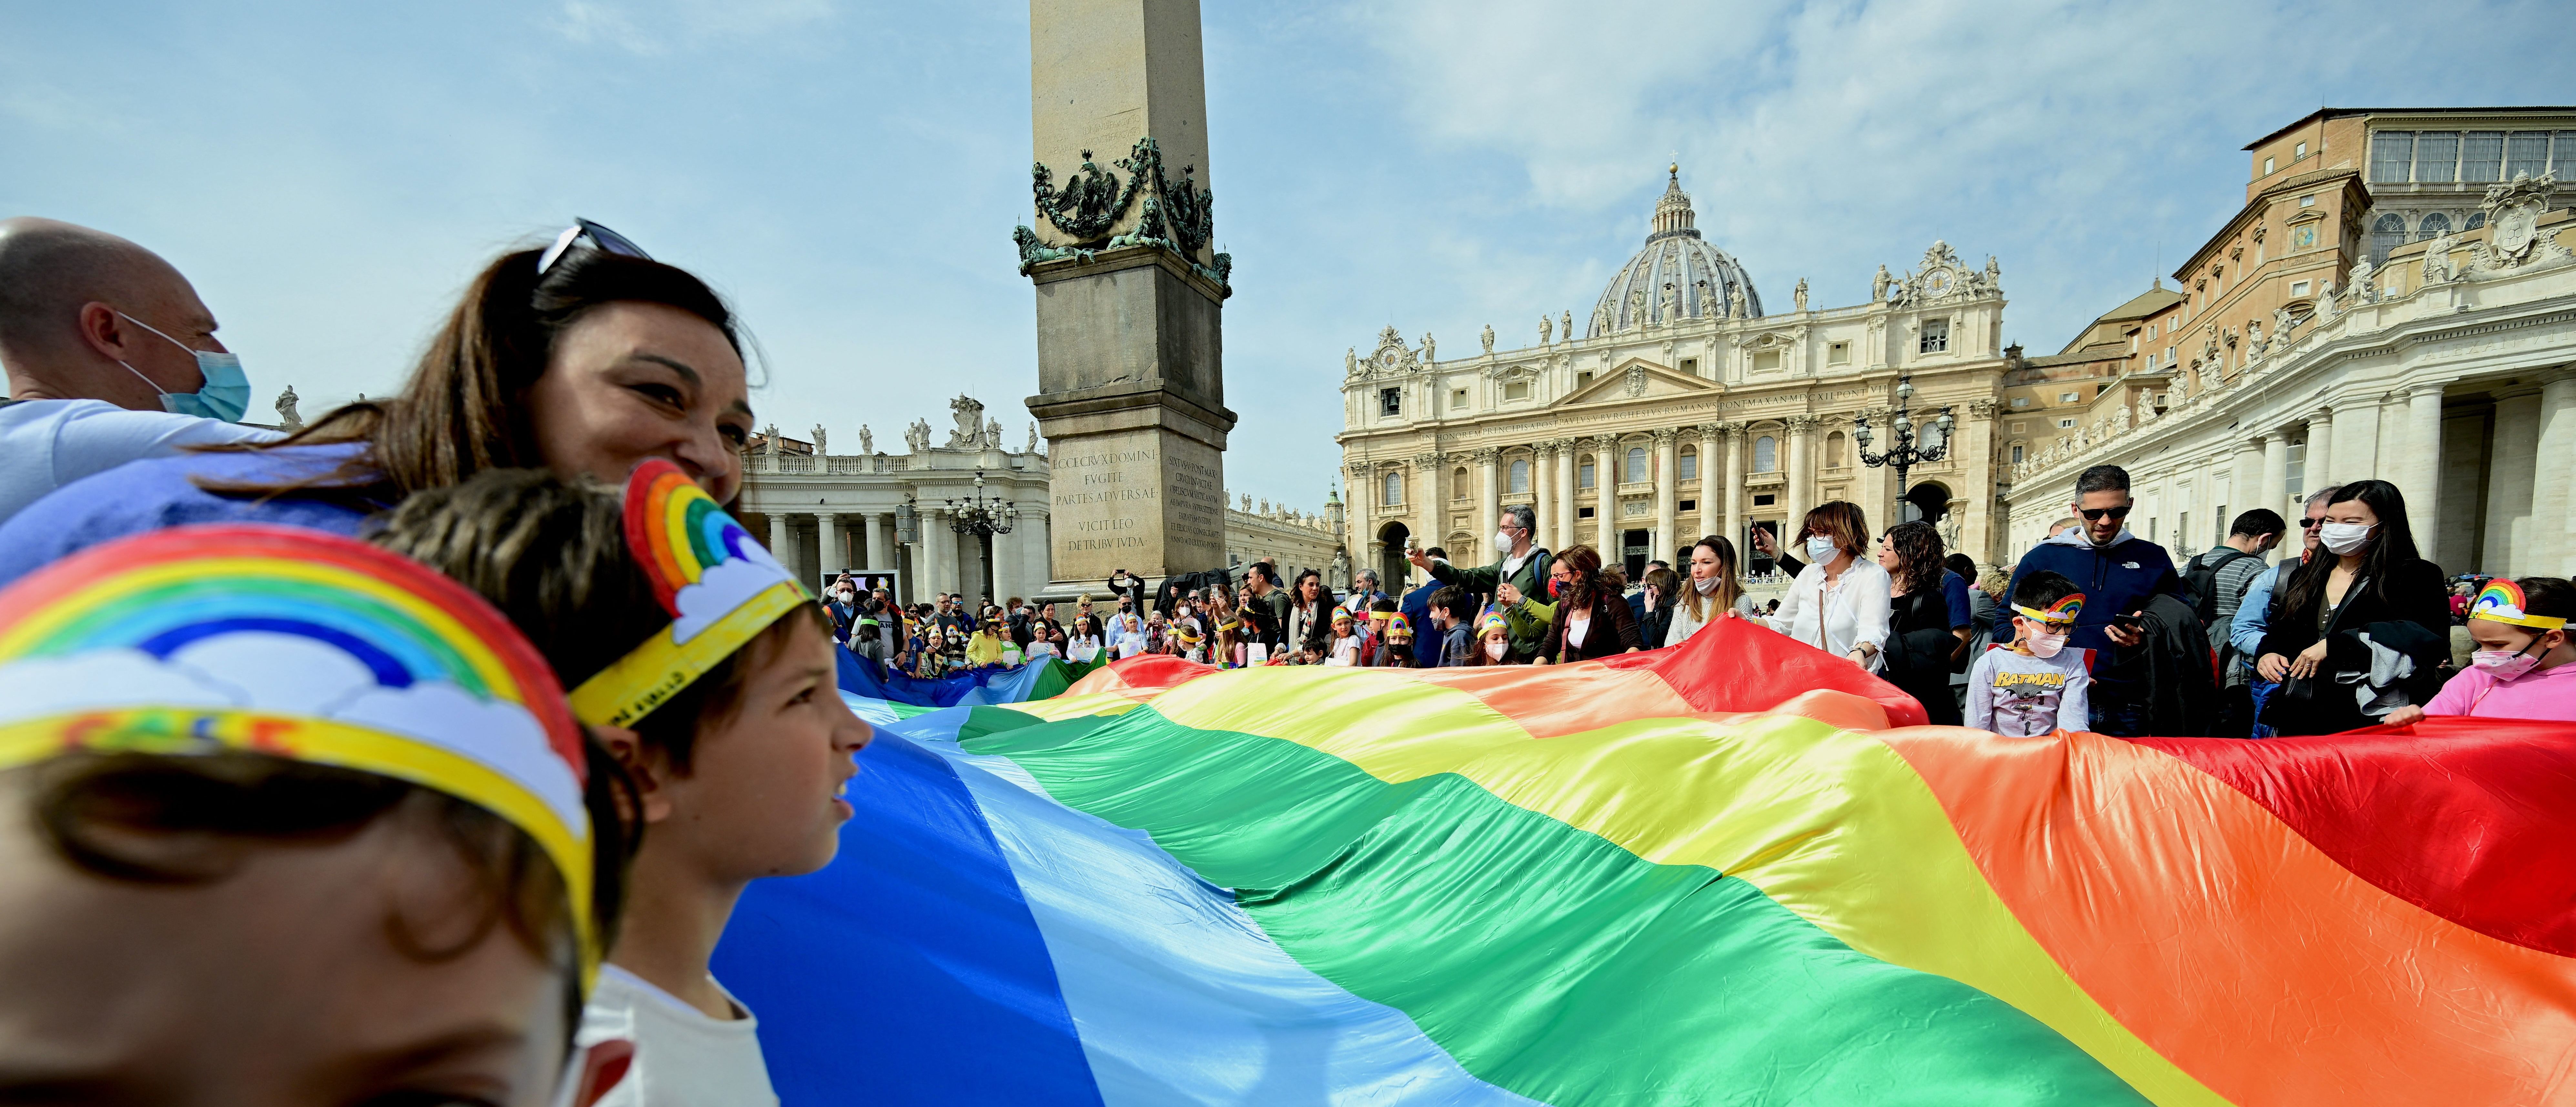 TOPSHOT - Onlookers hold a rainbow flag as Pope Francis speaks to the crowd during his Angelus prayer from the window of the apostolic palace overlooking St Peter's Square at the Vatican, on March 27, 2022. (Photo by VINCENZO PINTO/AFP via Getty Images)